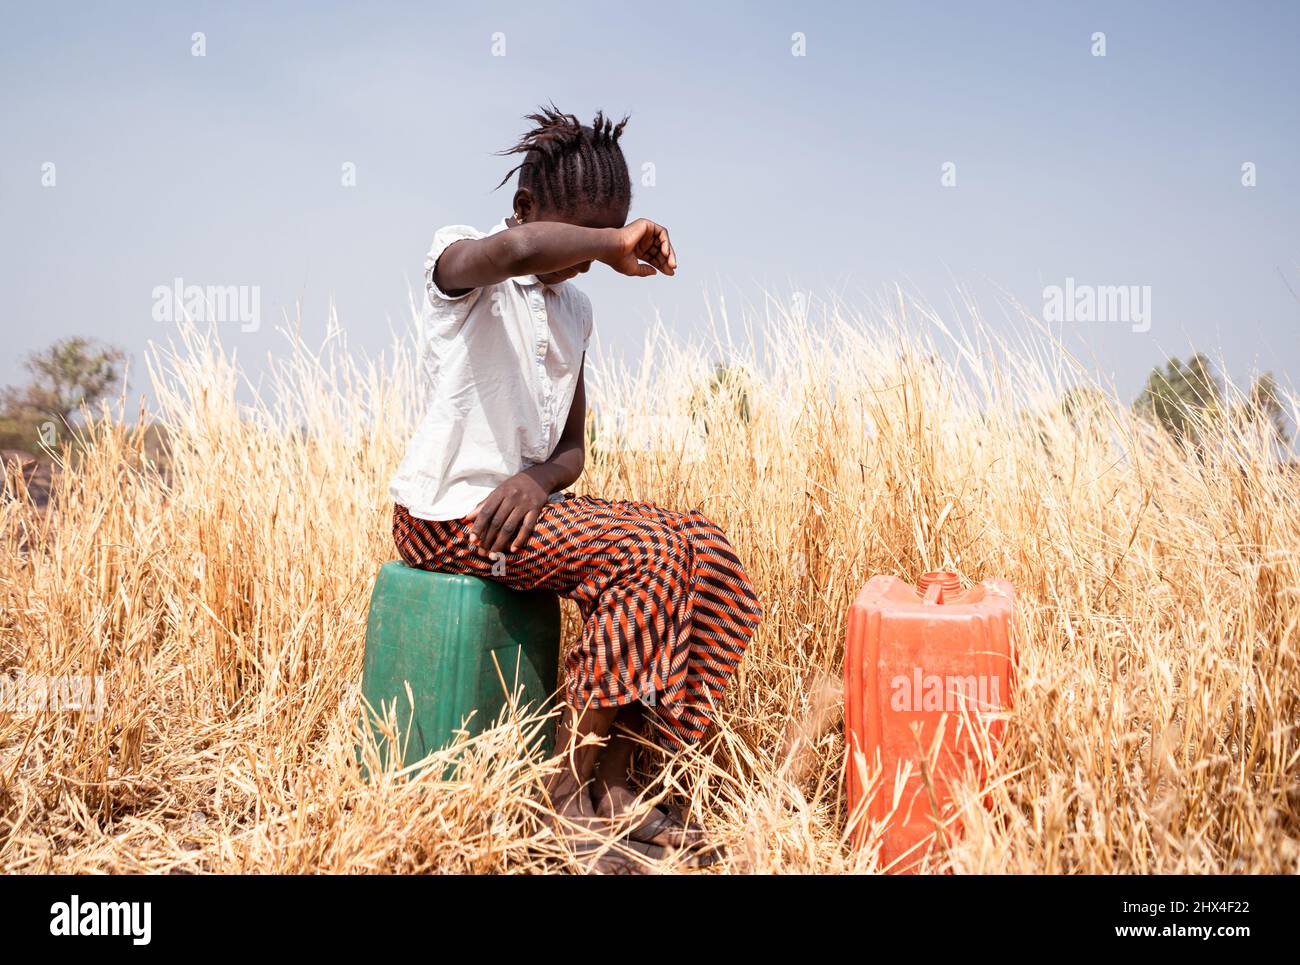 Exhausted little girl sitting on a plastic water canister in a dry field in the African bush suffering from scorching heat and her hard work; Child la Stock Photo